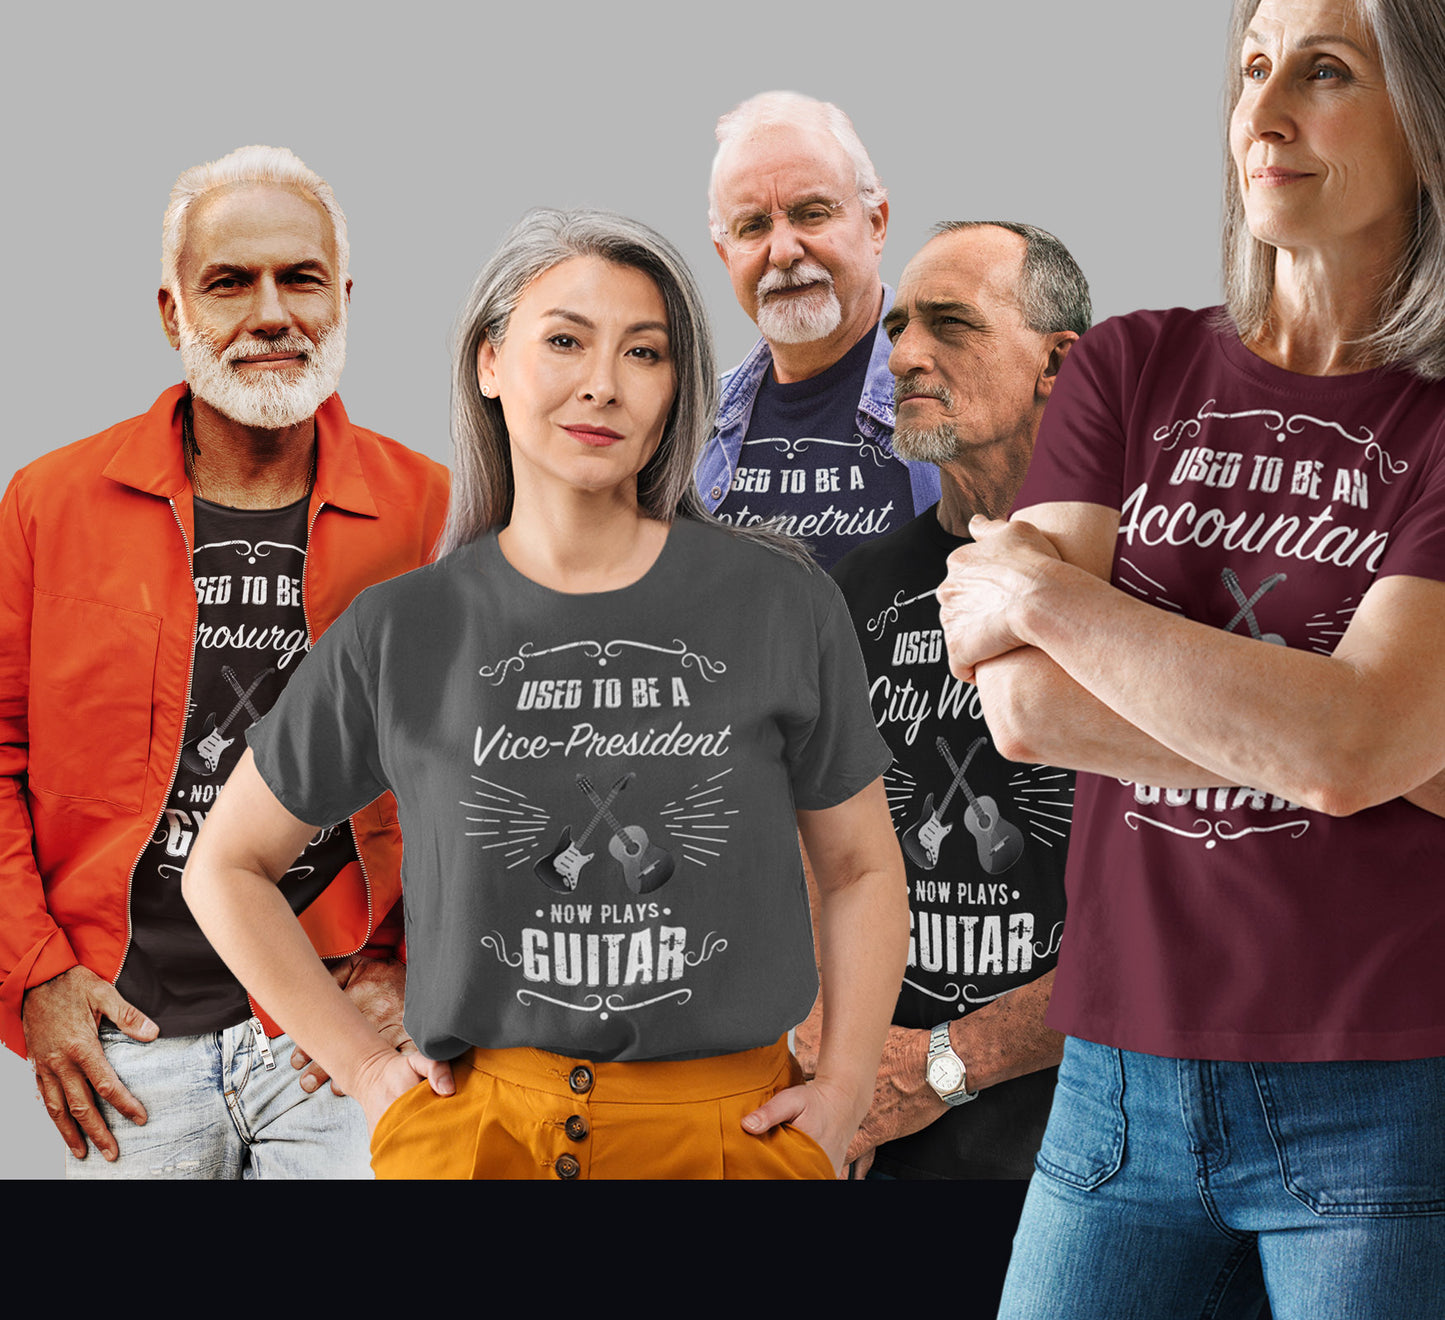 Used to be a CONSULTANT; Now Plays GUITAR - Funny Retirement Gift, Unisex T-shirt Bella+Canvas 3001, dark shirt colors for amateur musician/guitar player